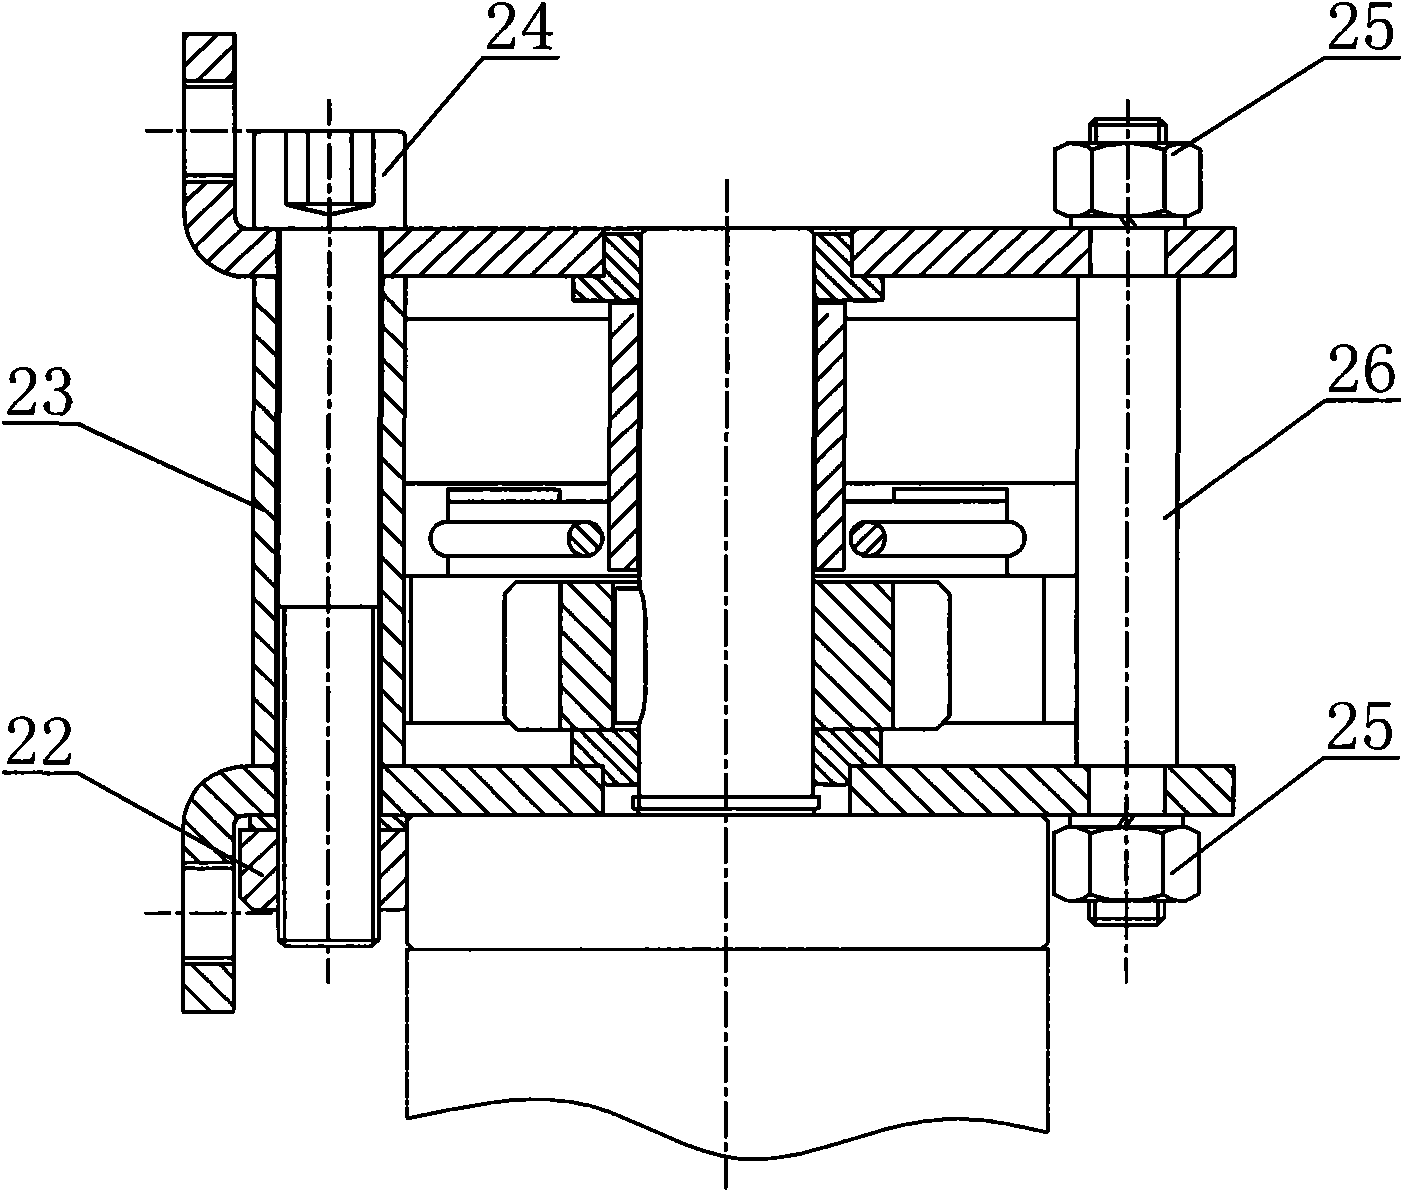 Bidirectional clutch gearbox for high voltage switch